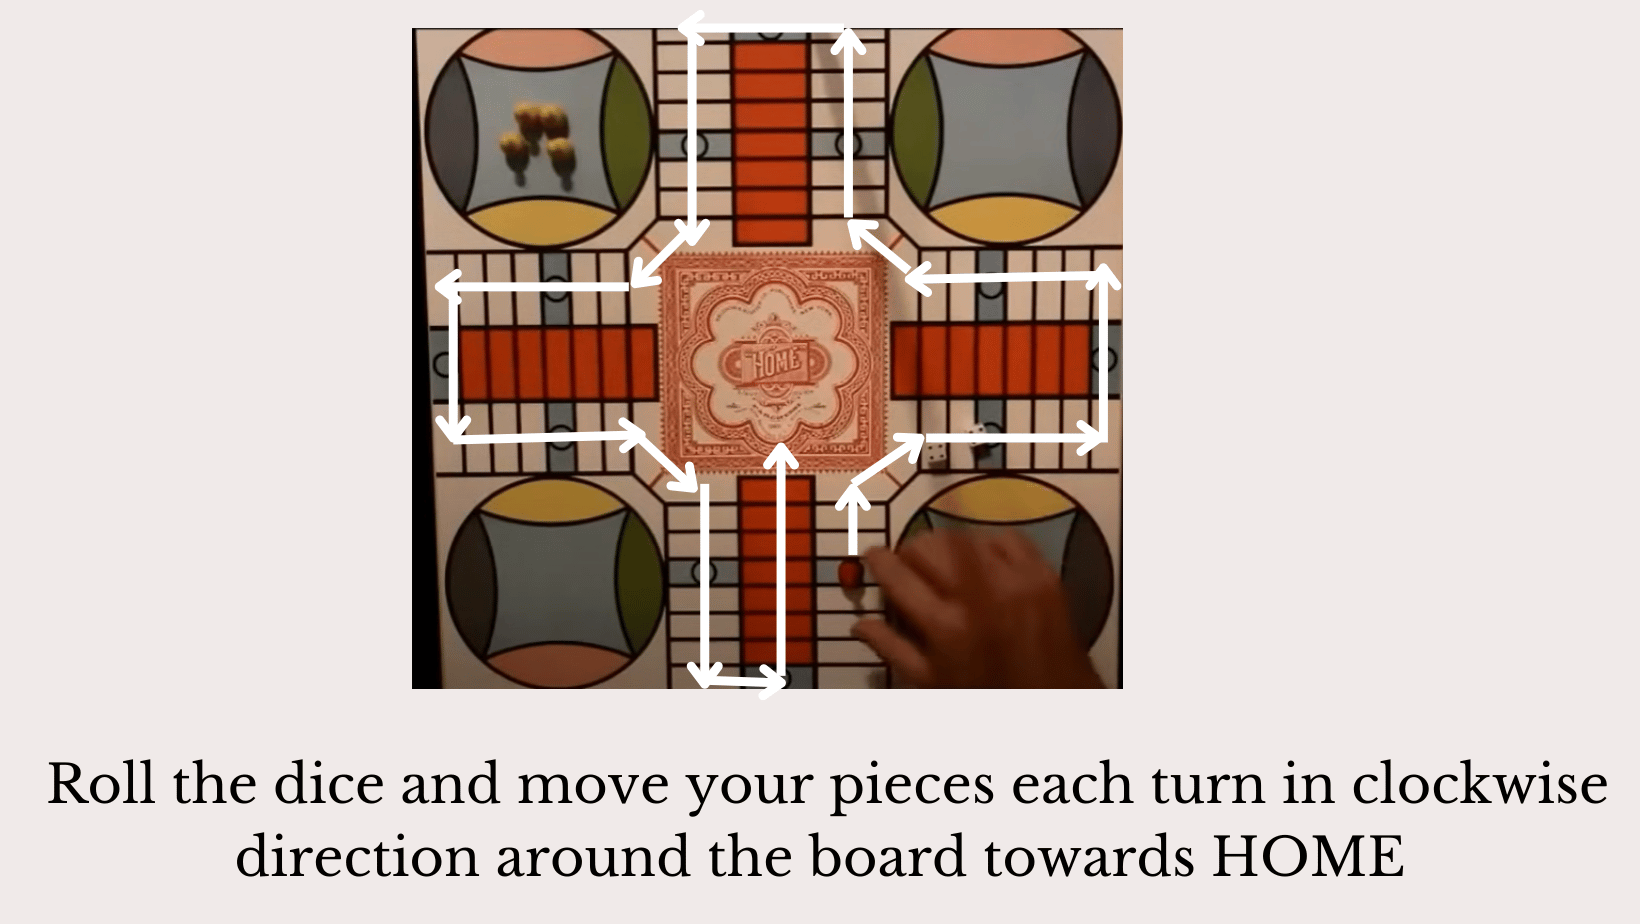 Rules for Parcheesi - rolling the dice and moving your pawn